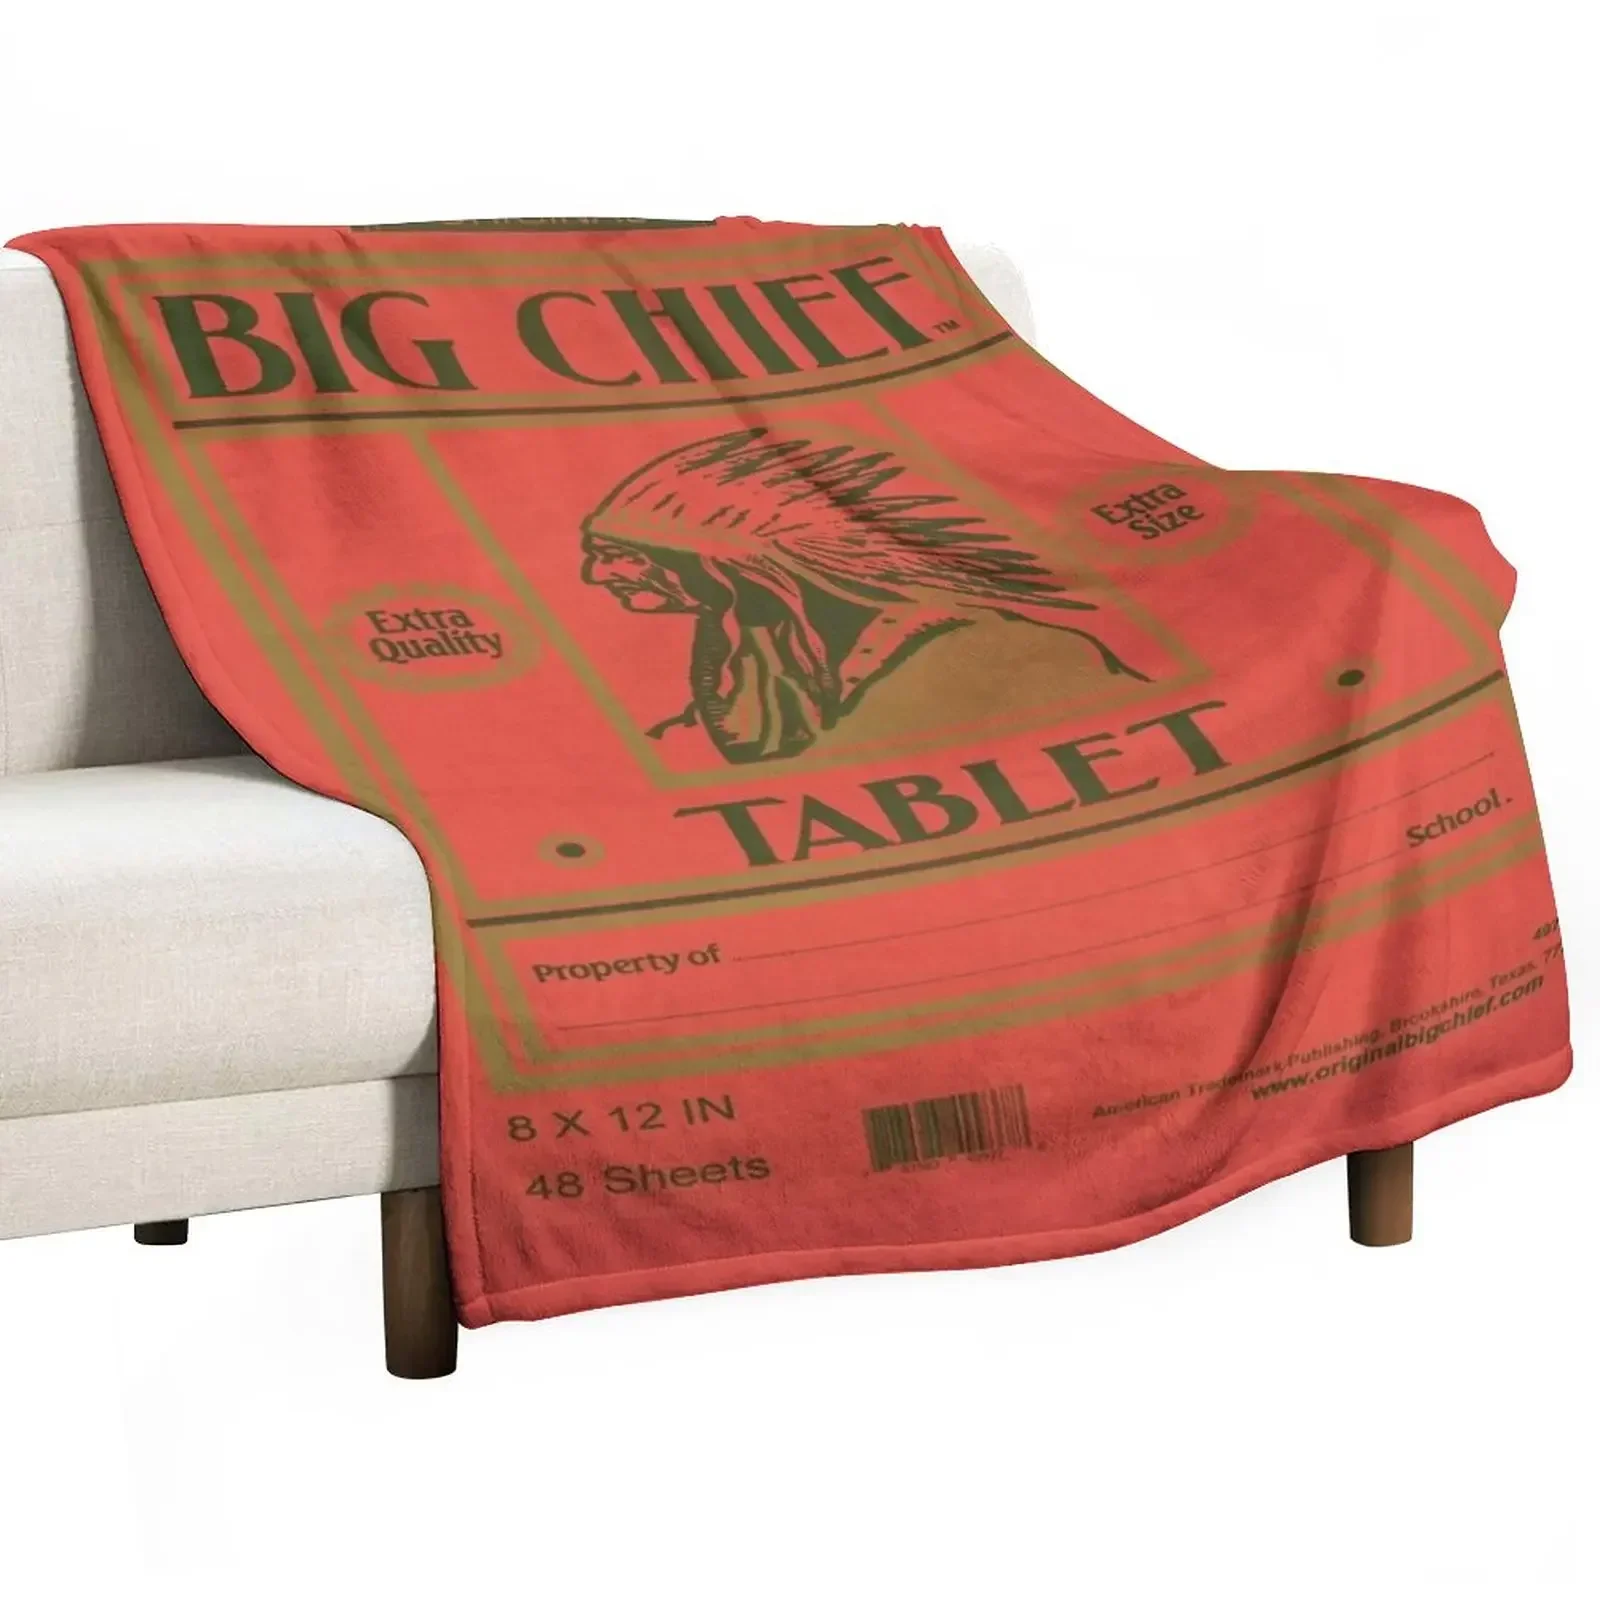 

Big Chief Vintage Tablet Cover Throw Blanket for sofa Polar Luxury Brand Thins Blankets